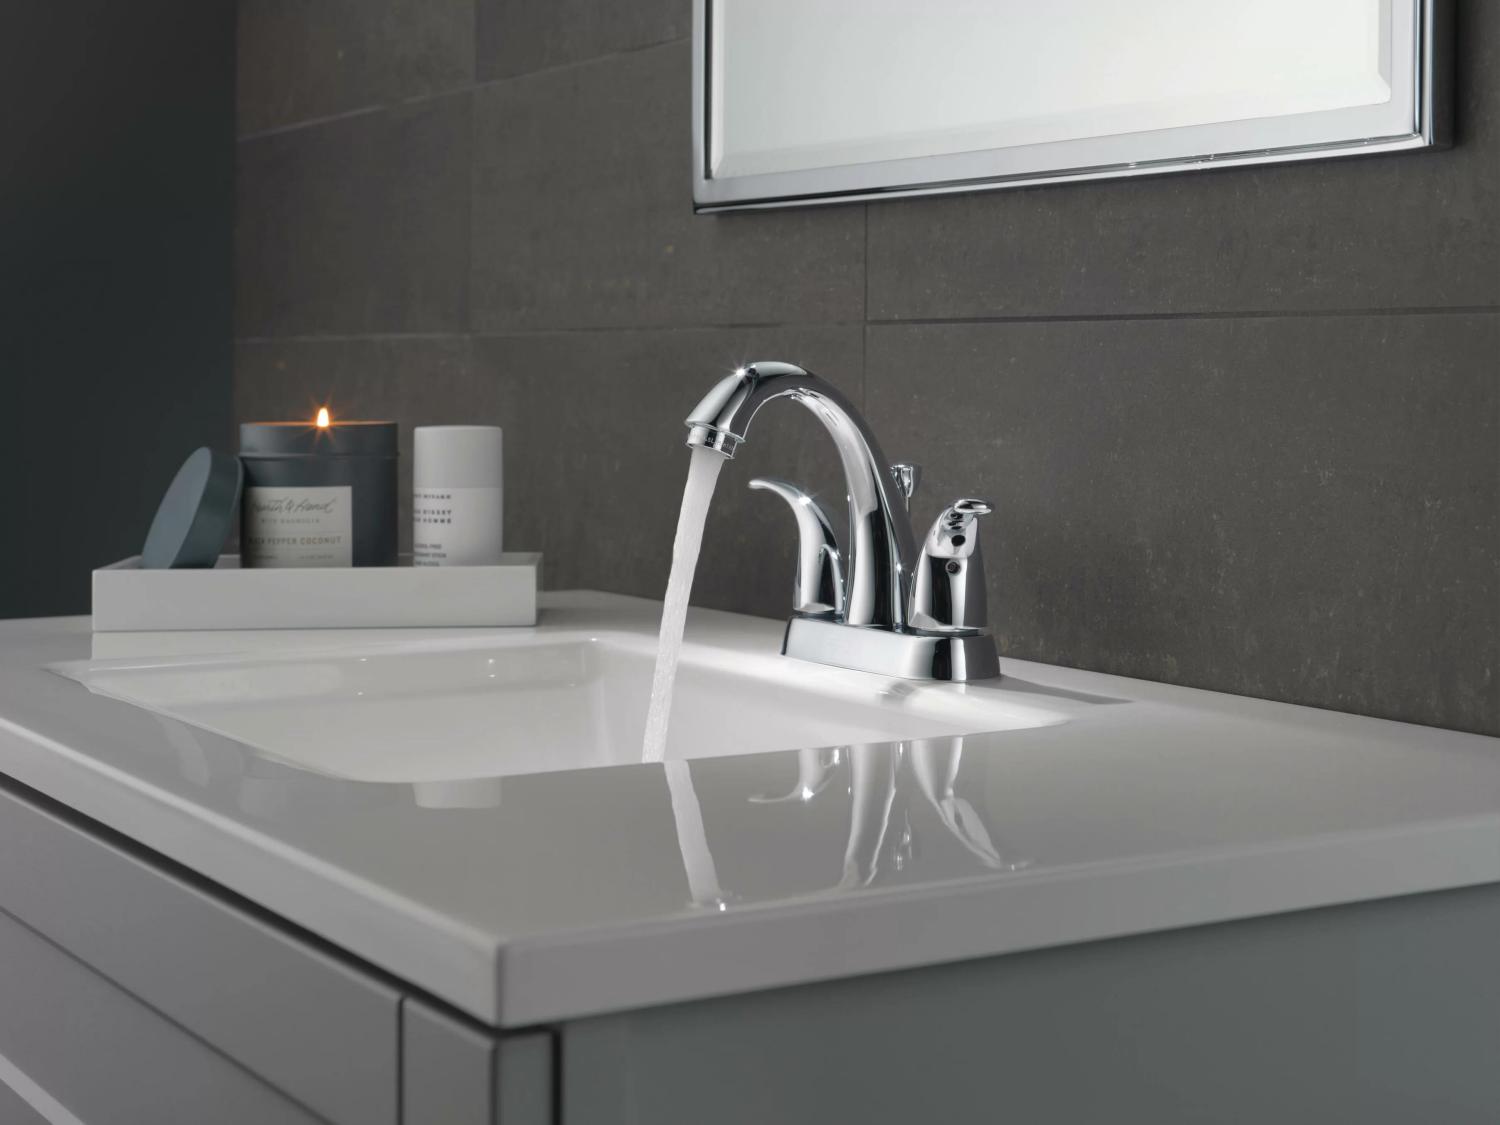 2023 Centerset Bathroom Faucets: Completely Style and Functionality - Blog - 2